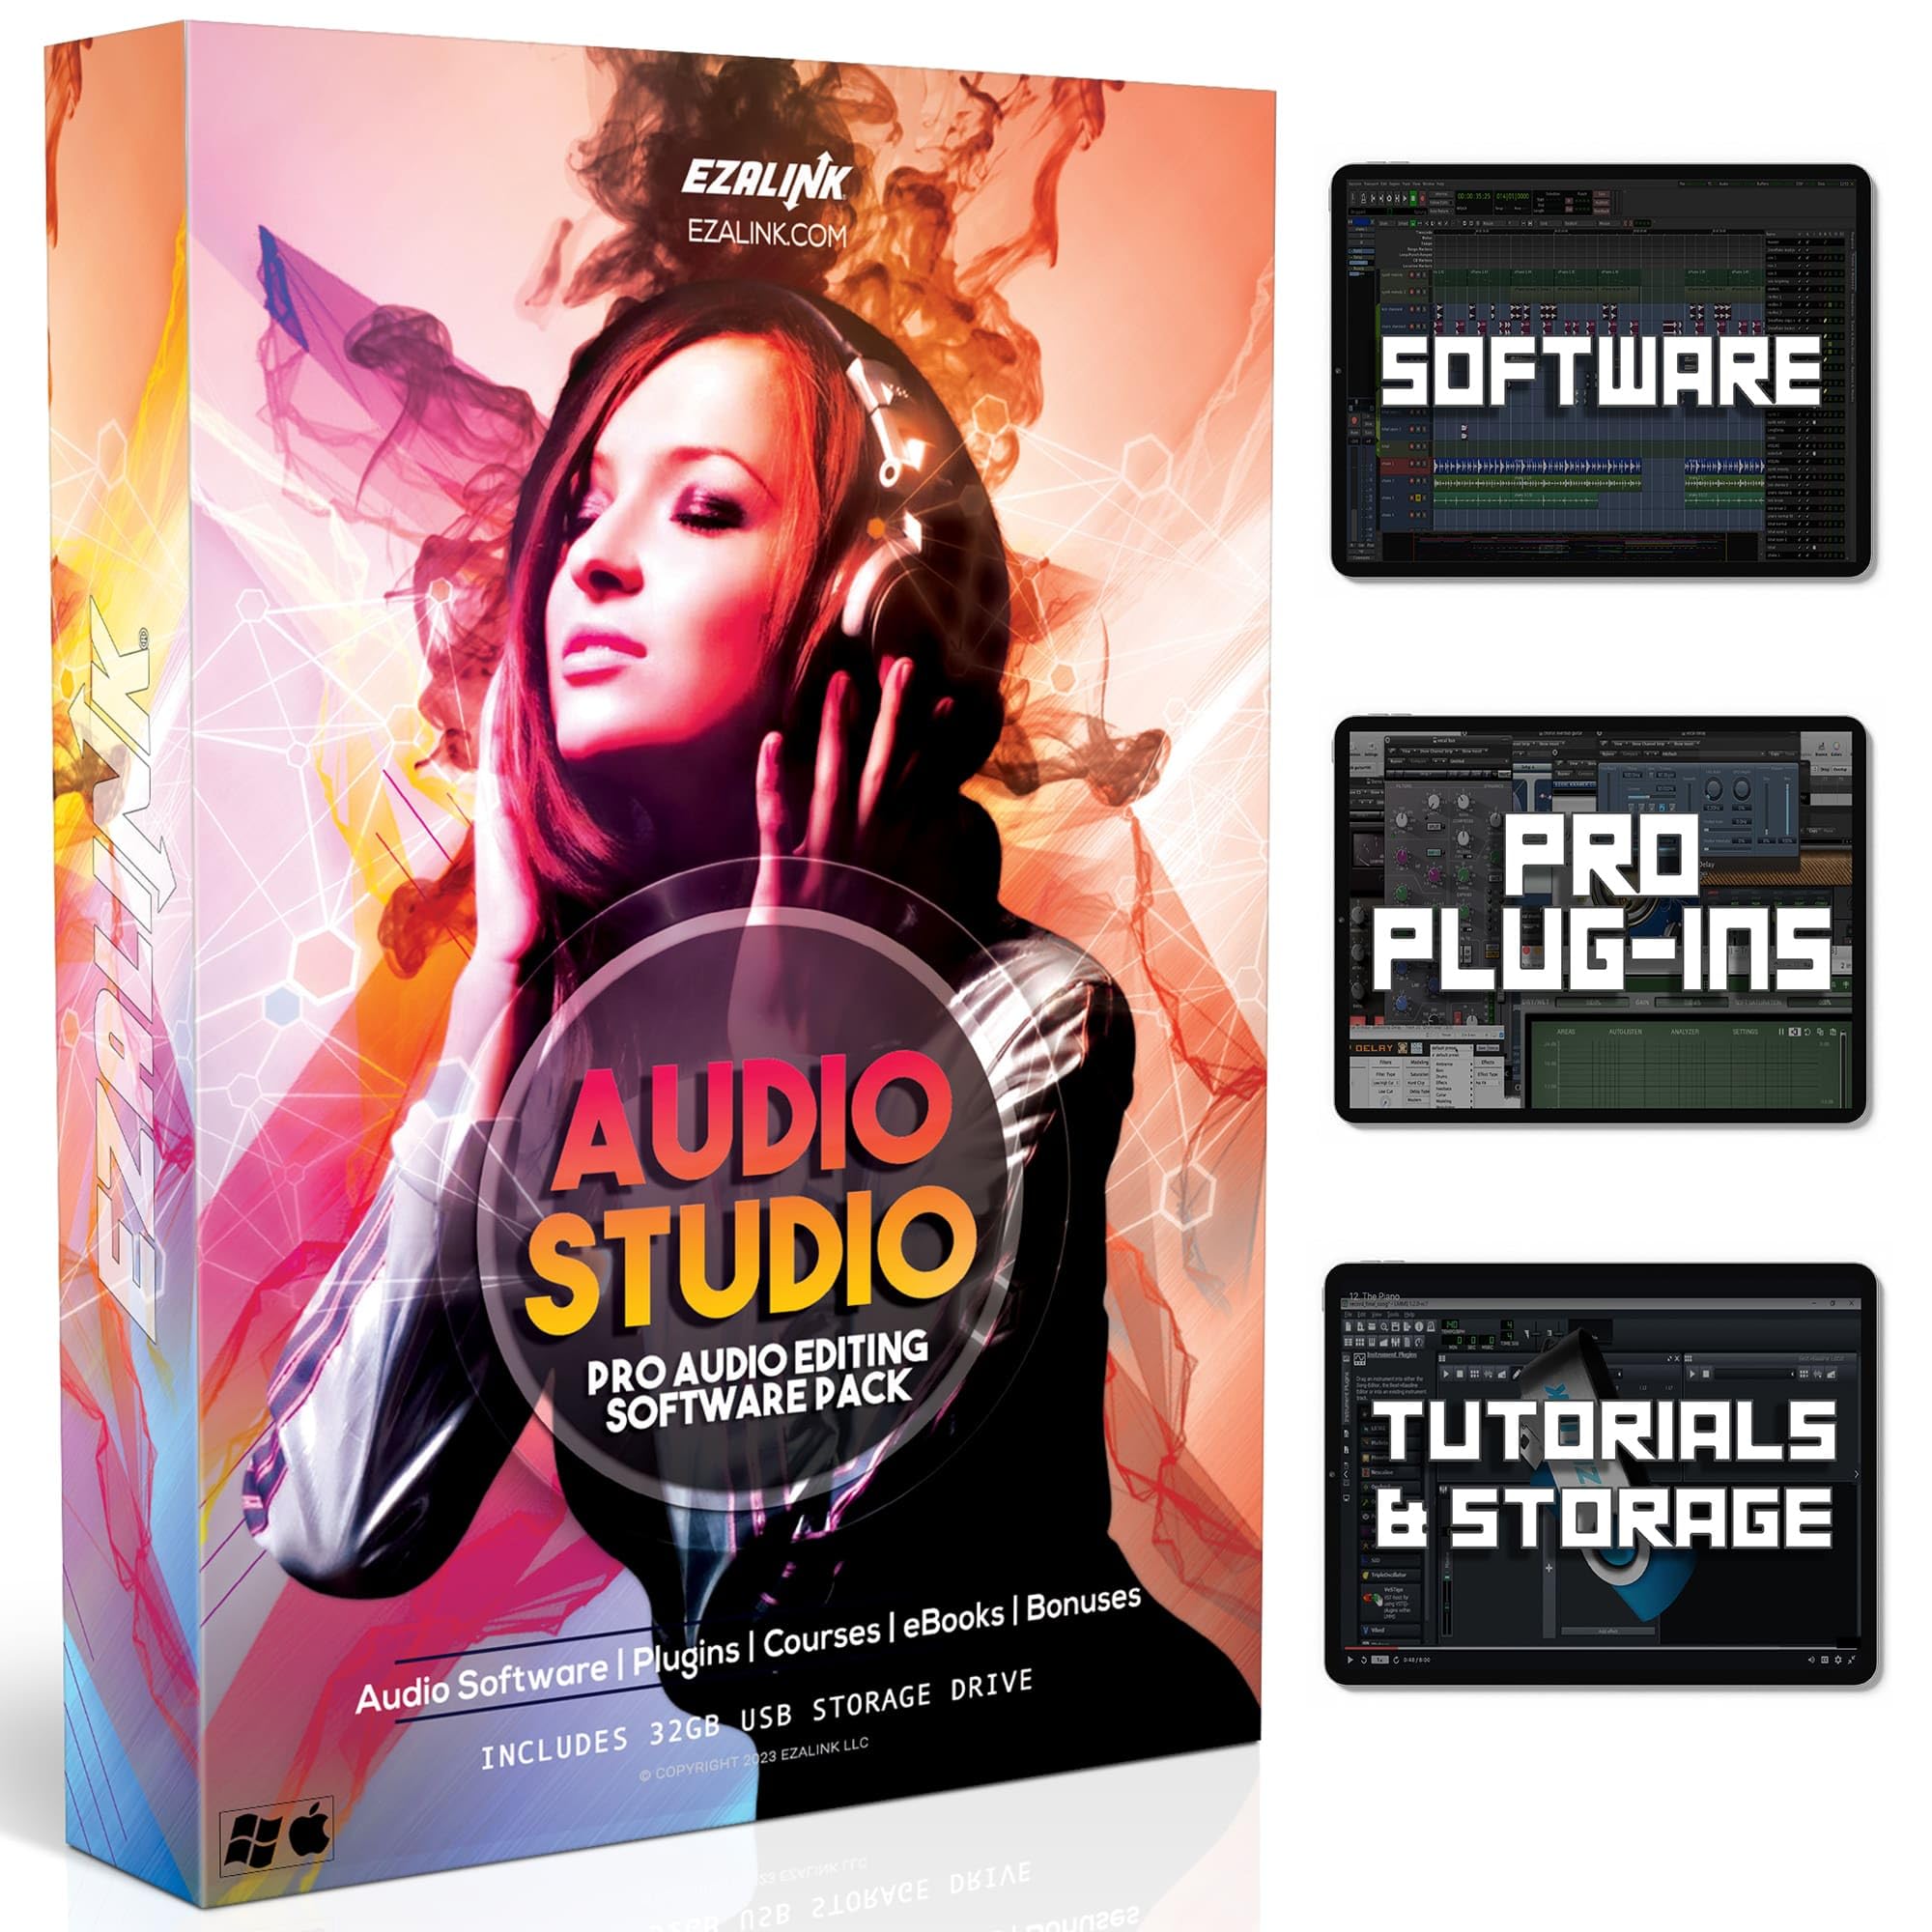 Audio Software Audacity and Professional DAW Music Podcast Editor, Recorder, Converter for Windows and Mac with Plug-ins, AI, Virtual Instruments | 32GB USB Bundle